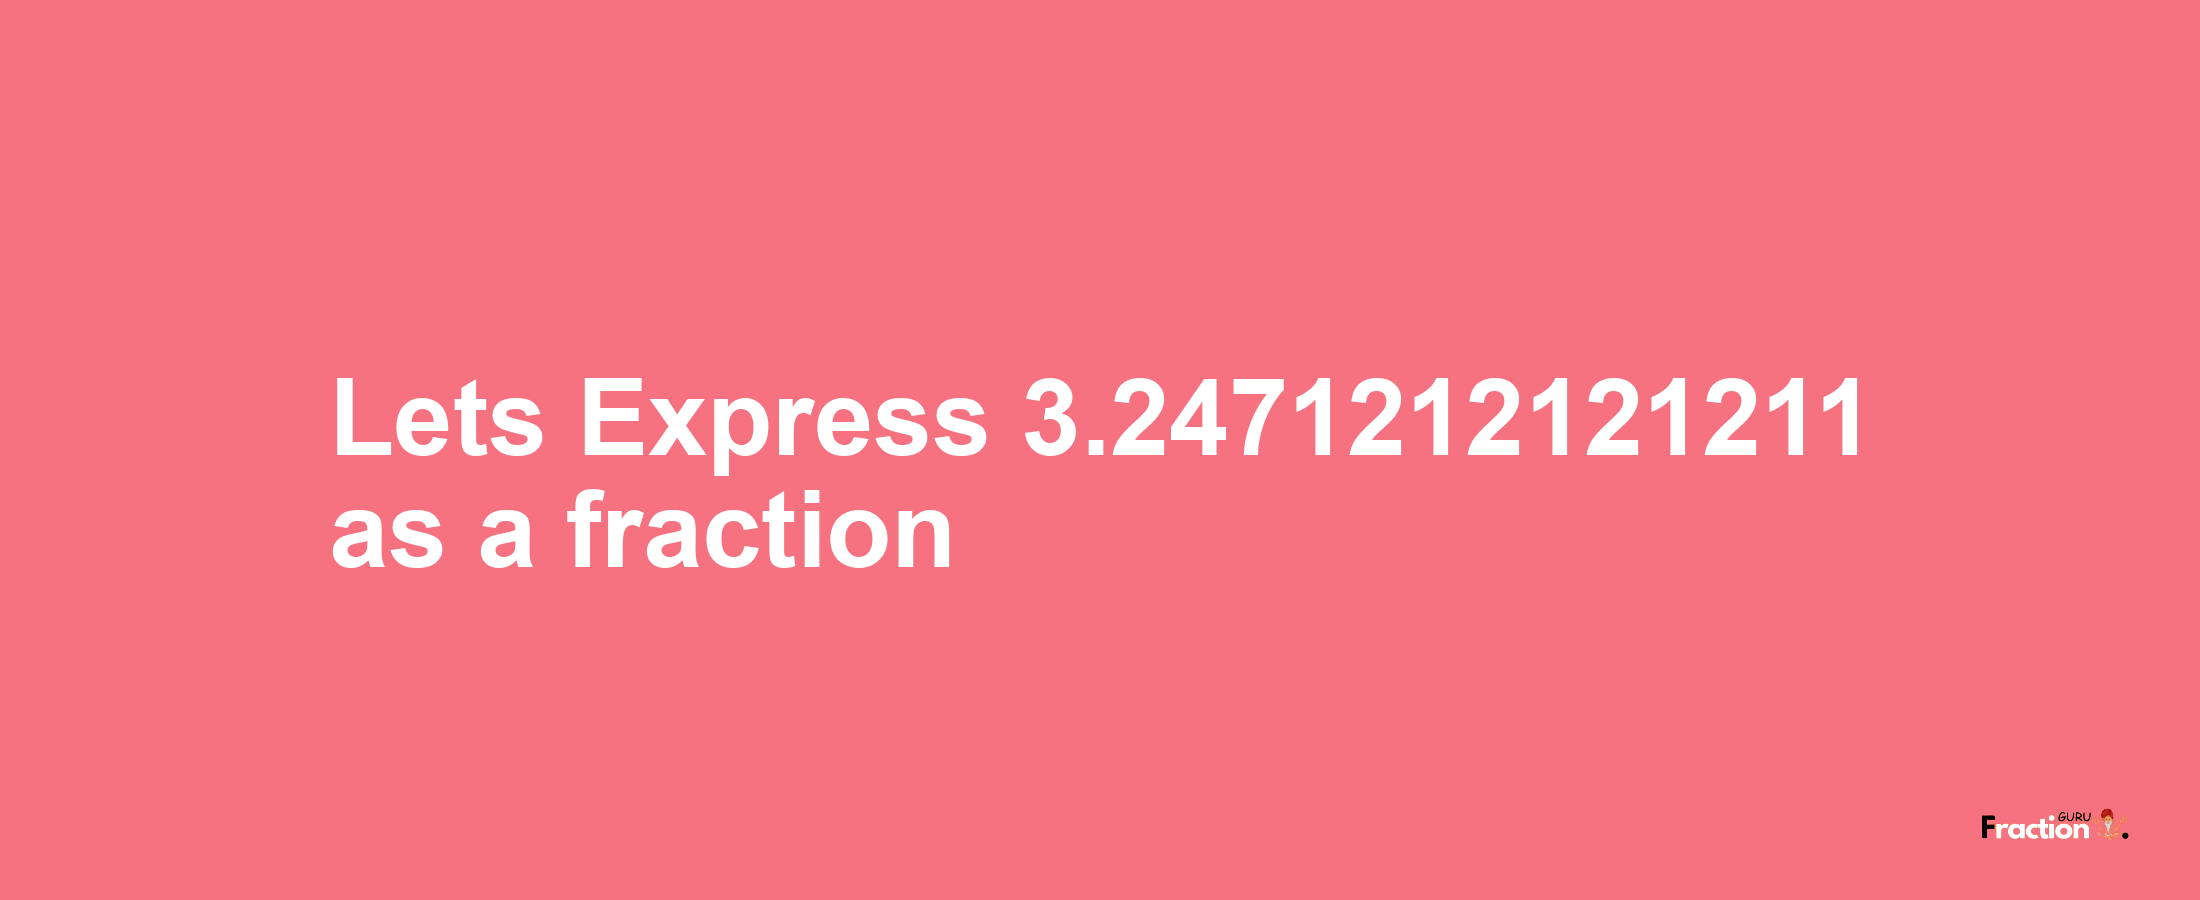 Lets Express 3.2471212121211 as afraction